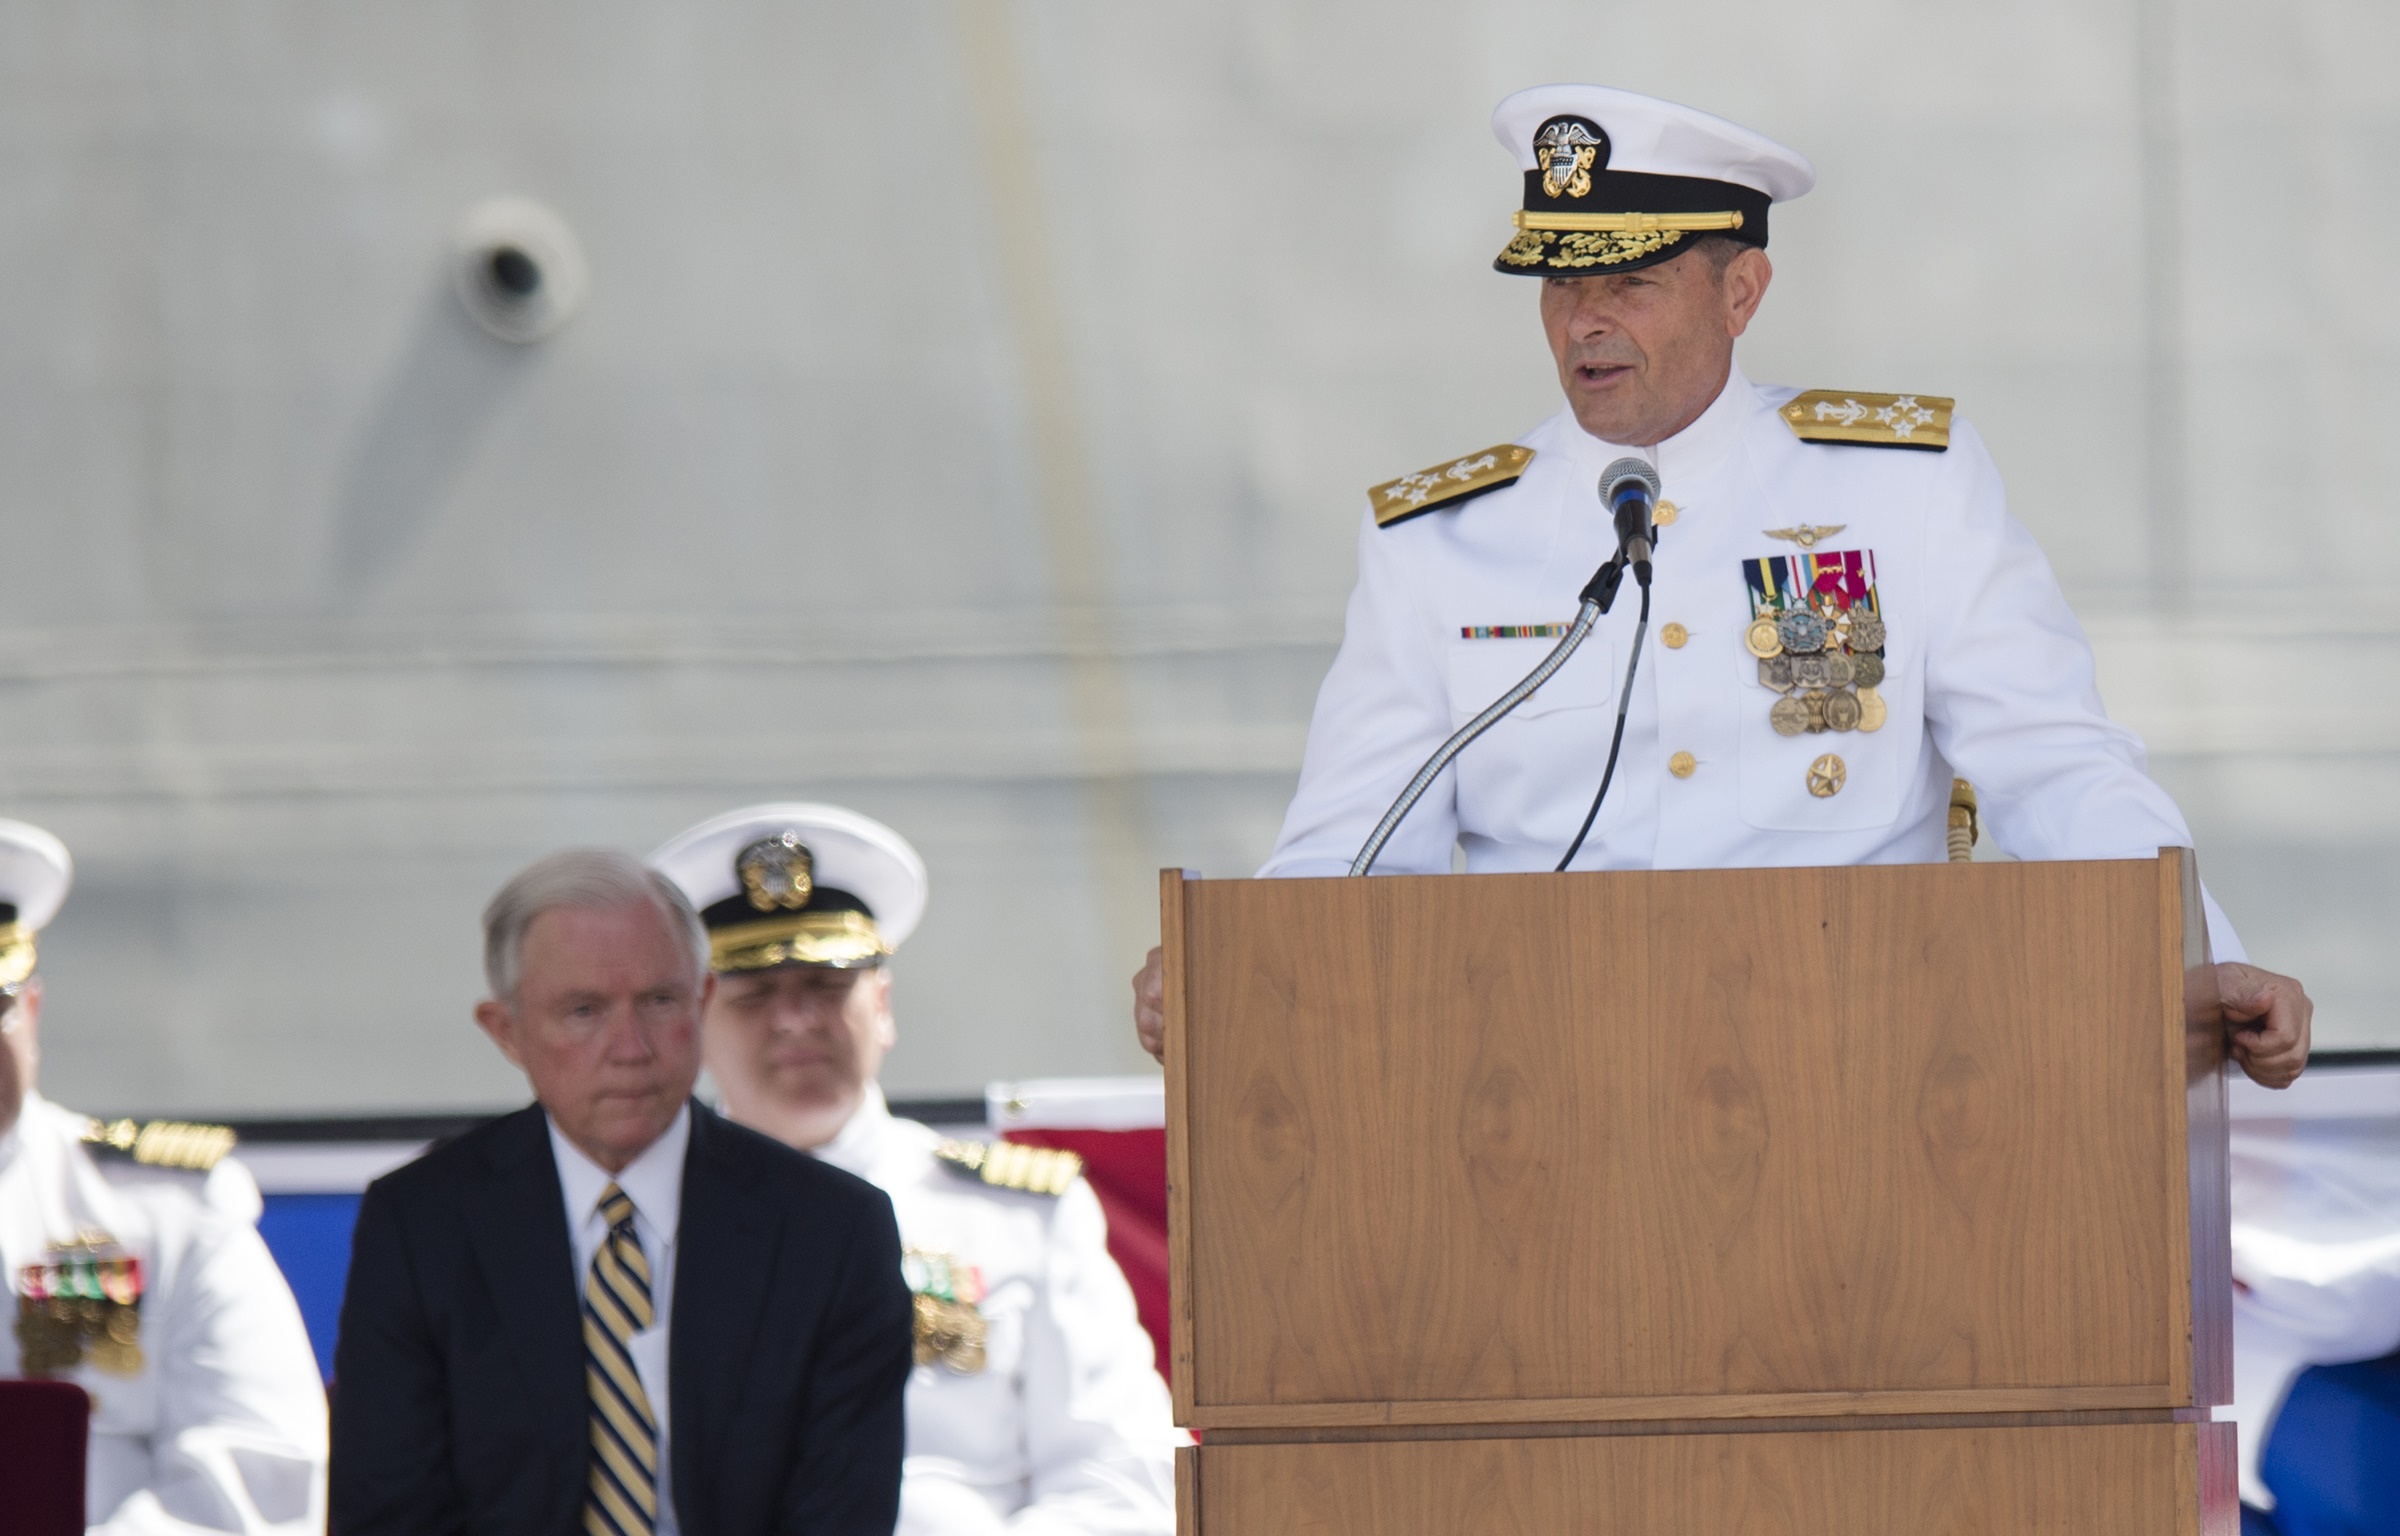 PHOTO: In this Sept. 10, 2016, file photo. Adm. William Moran speaks during the Commissioning of the USS Montgomery in Mobile, Ala.